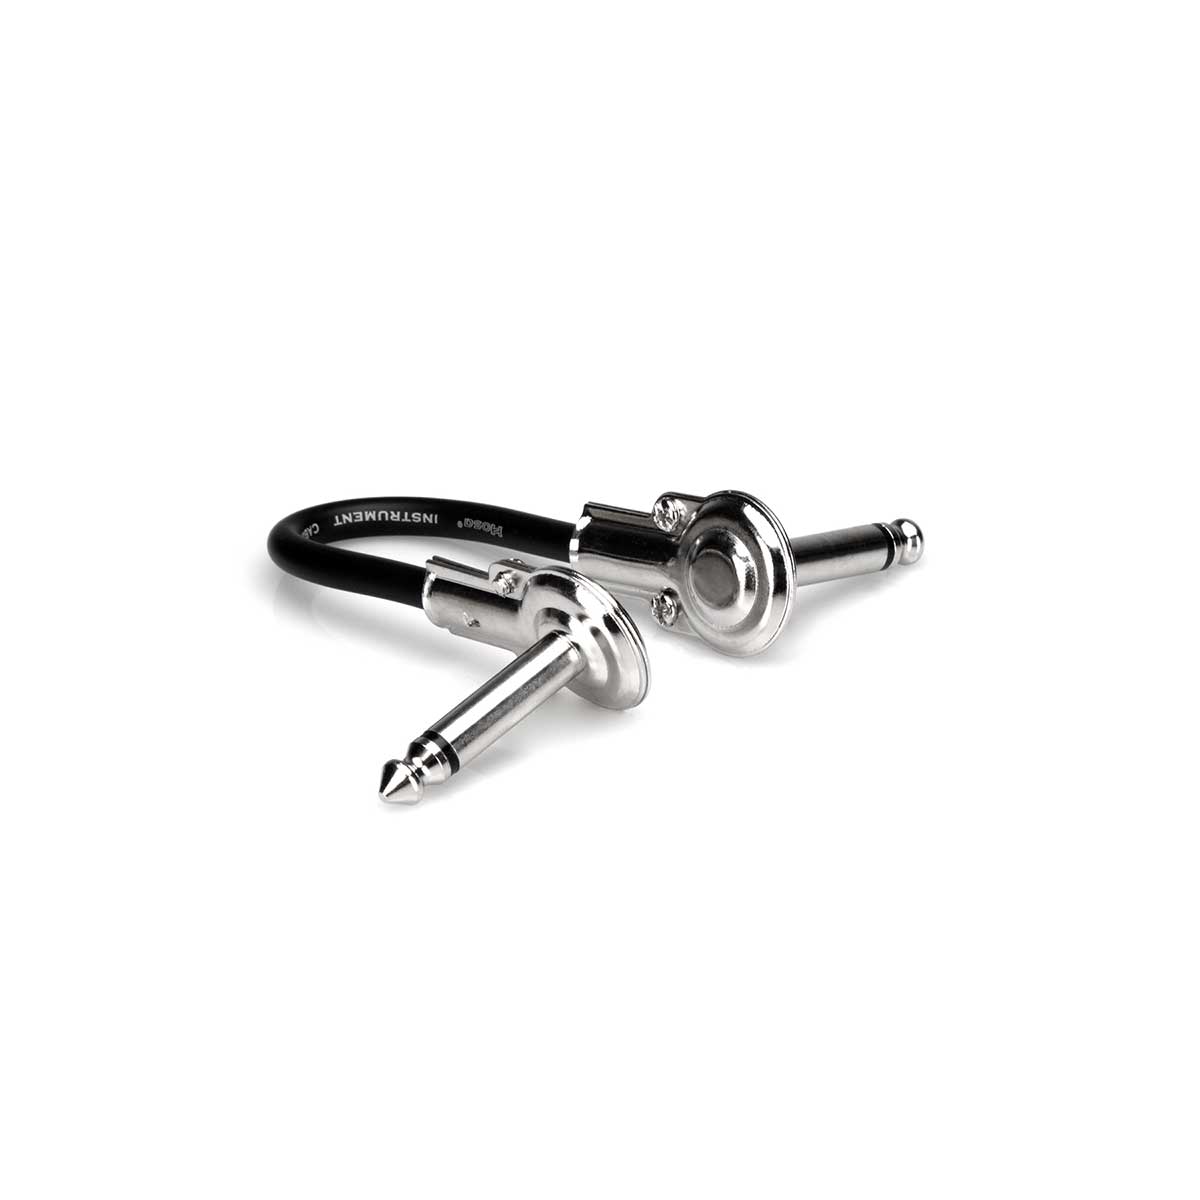 Hosa Guitar Patch Cable Low-profile Right-angle to Same 